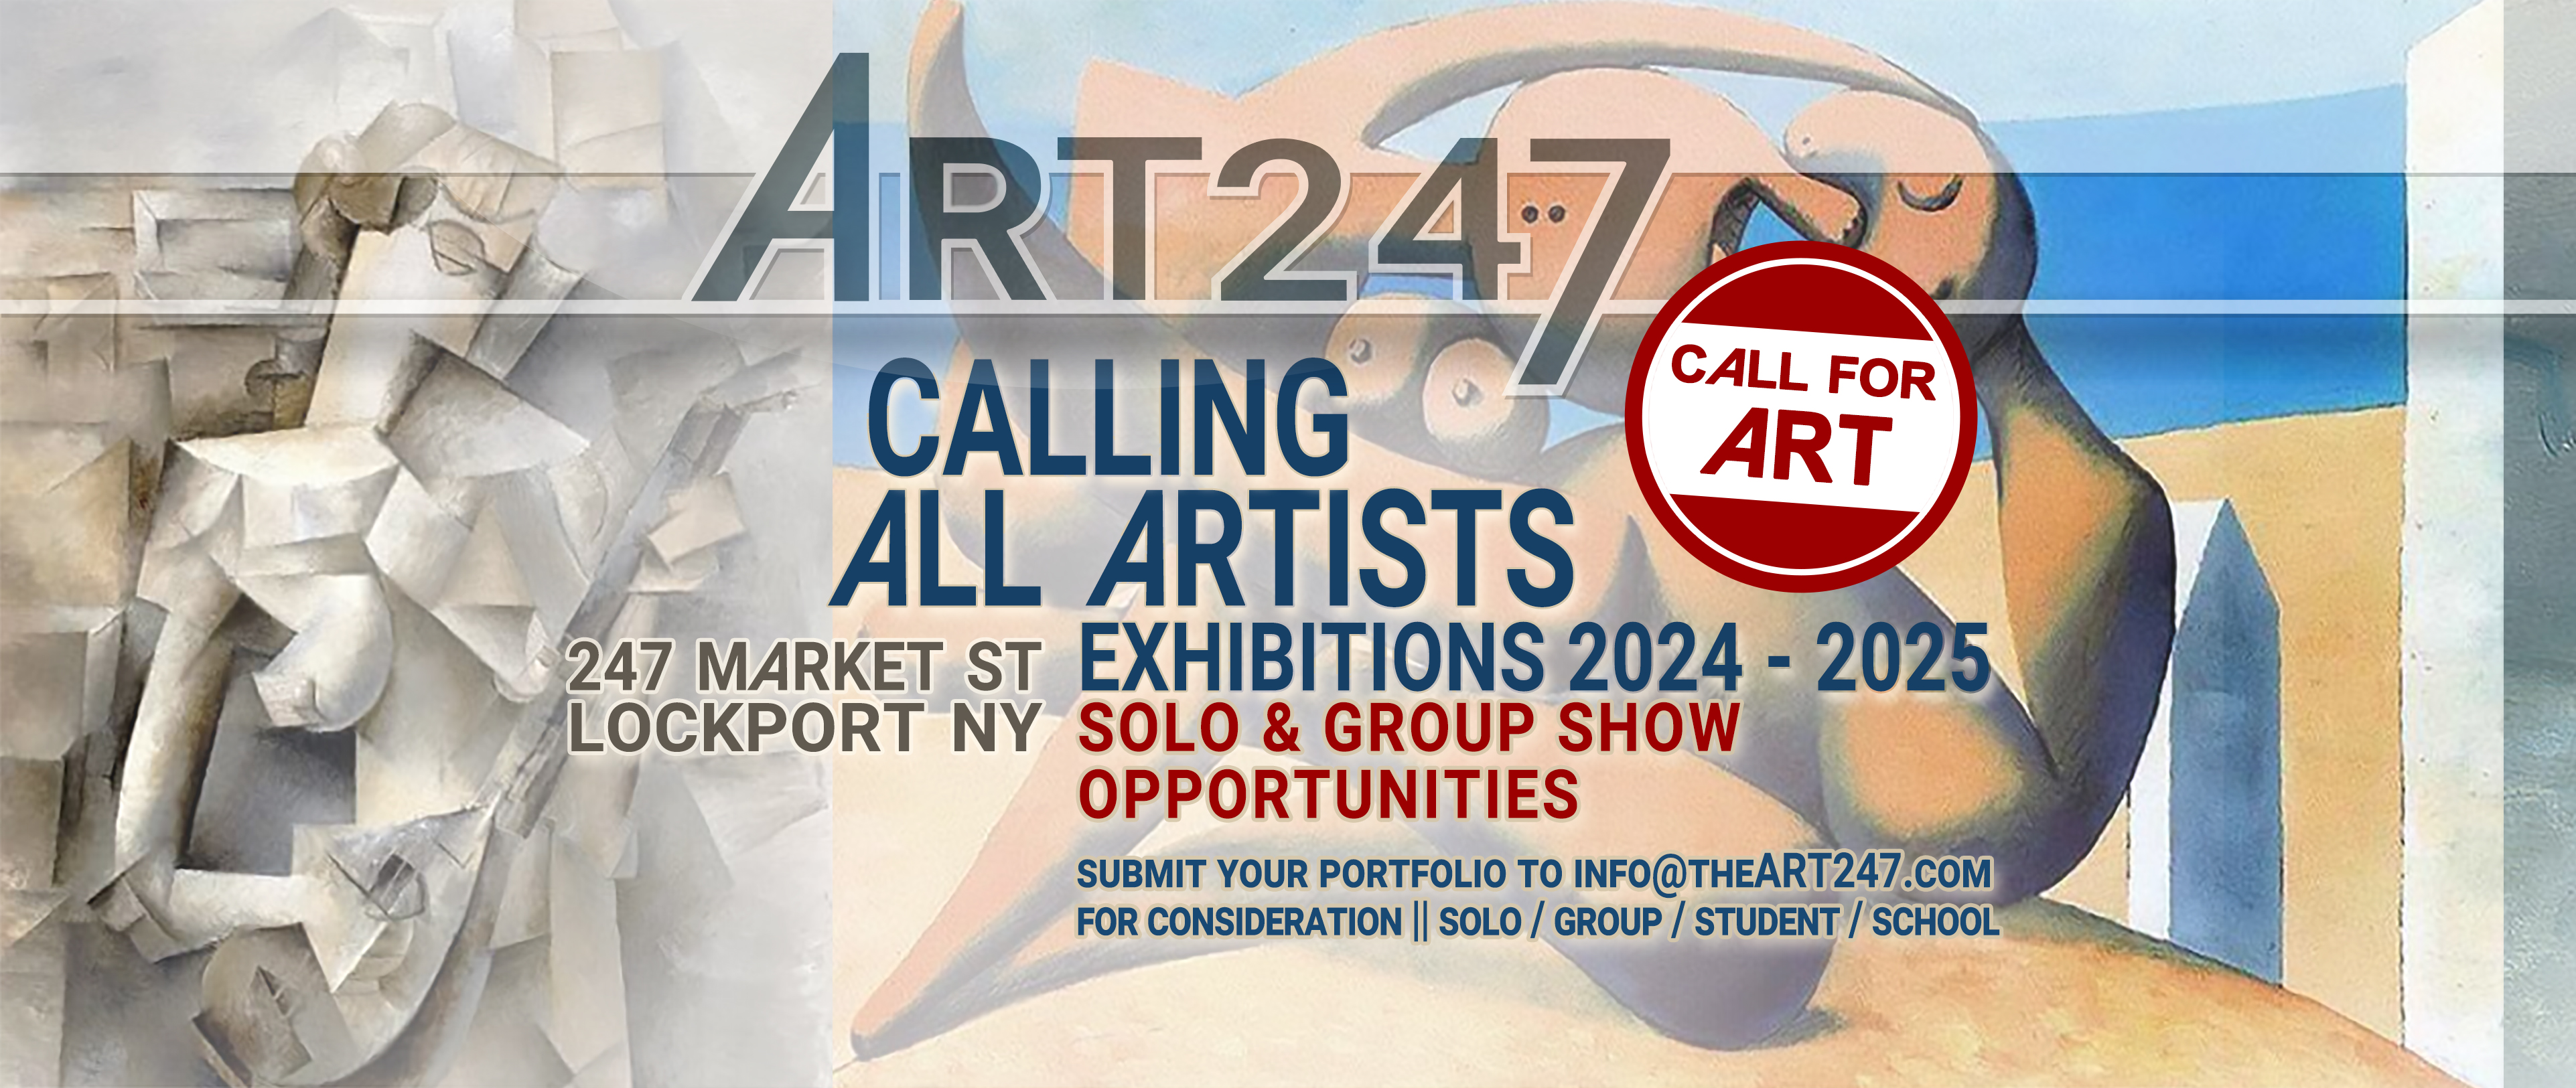 CALL FOR ART | Solo & Group Exhibition 2024 - 2025